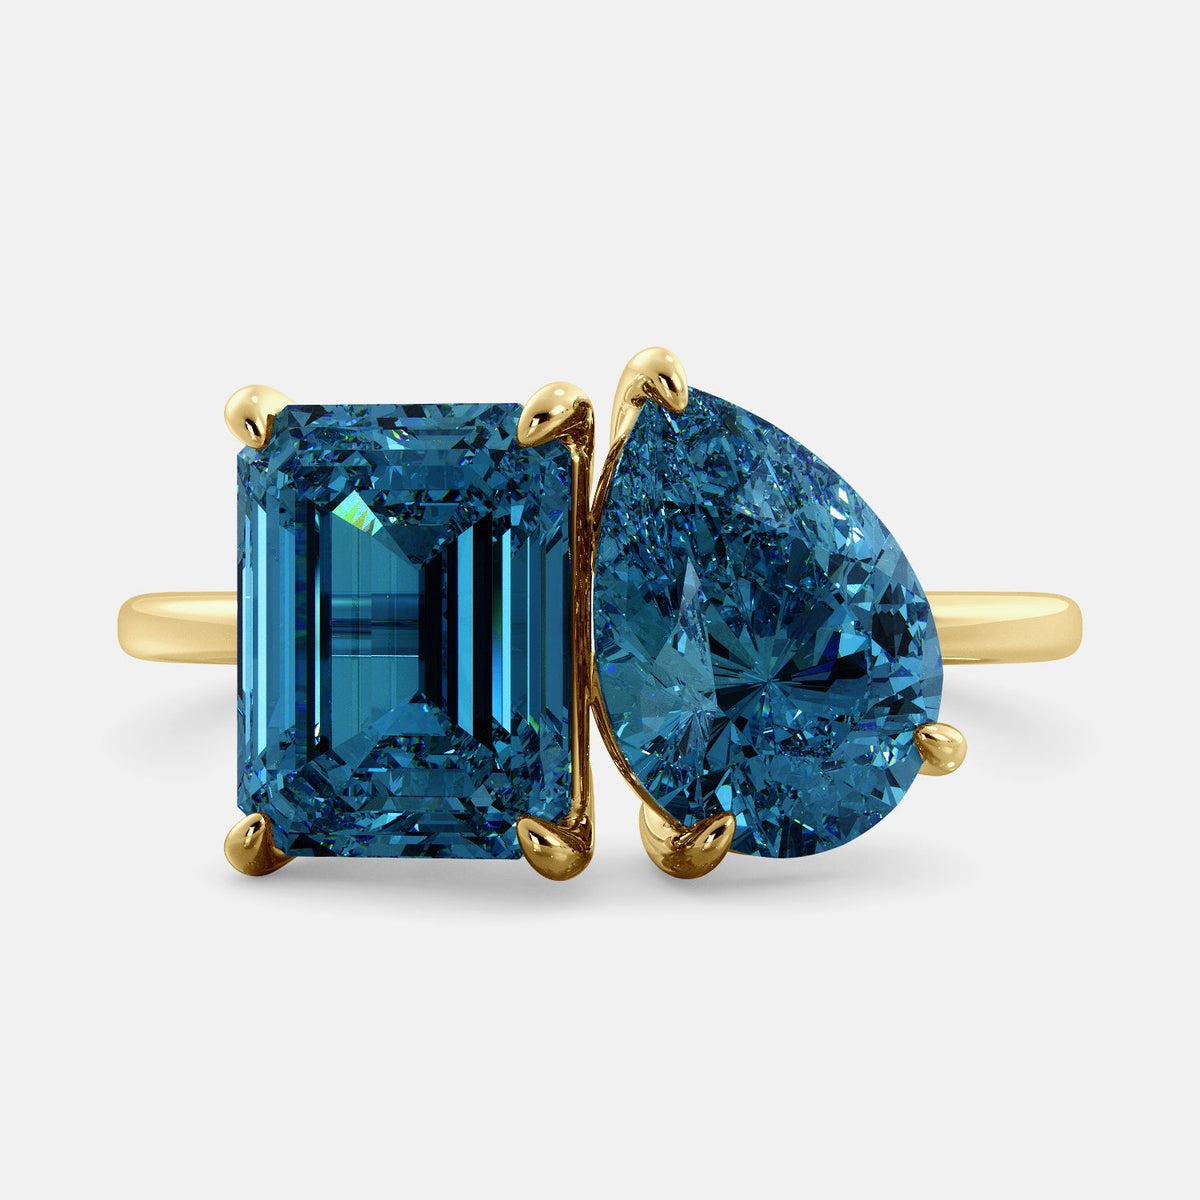 A toi et moi ring with two london blue topaz gemstones. The first gemstone is an emerald cut, and the second gemstone is a pear shape. The ring is made of 14k yellow gold and is set on a dainty band. The gemstones are sparkling in the light and are a beautiful and meaningful piece of jewelry.